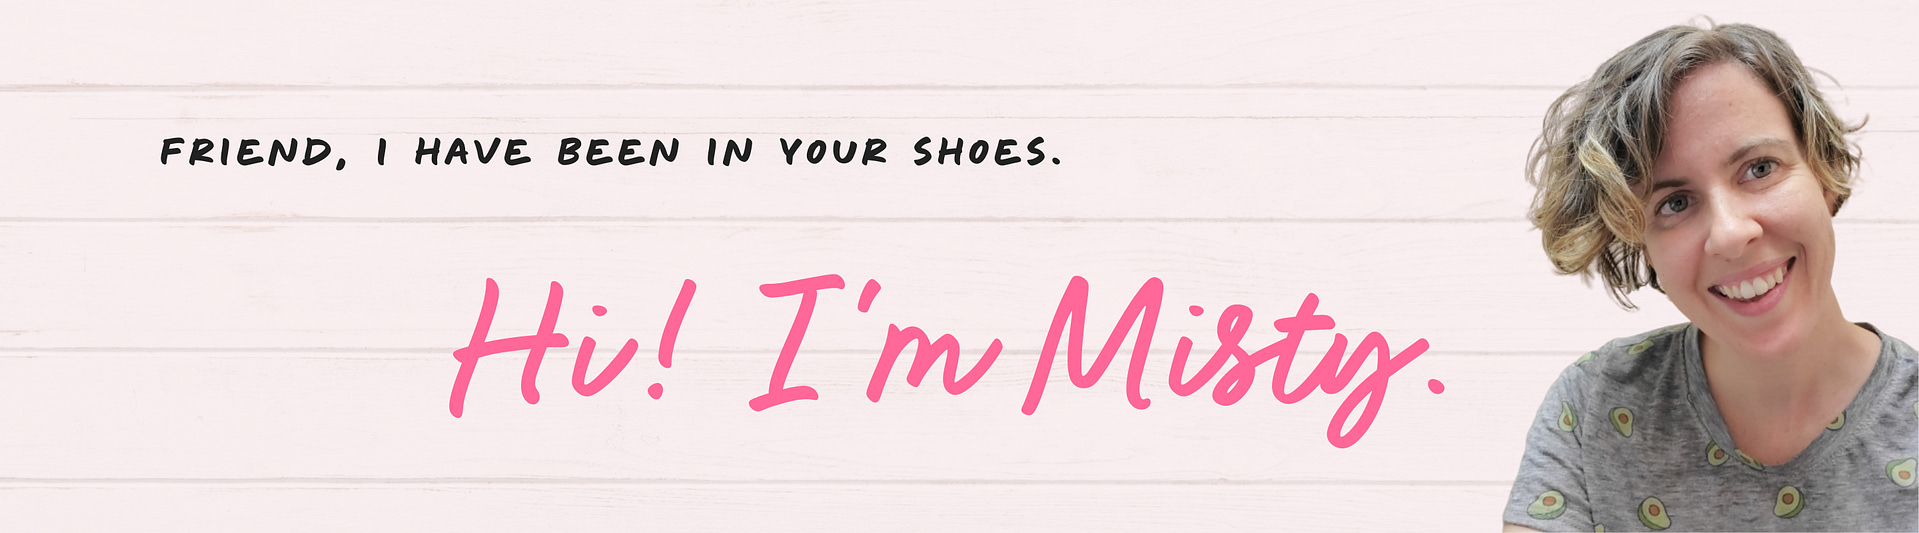 Friend, I have been in your shoes. Hi! I'm Misty Dorman.